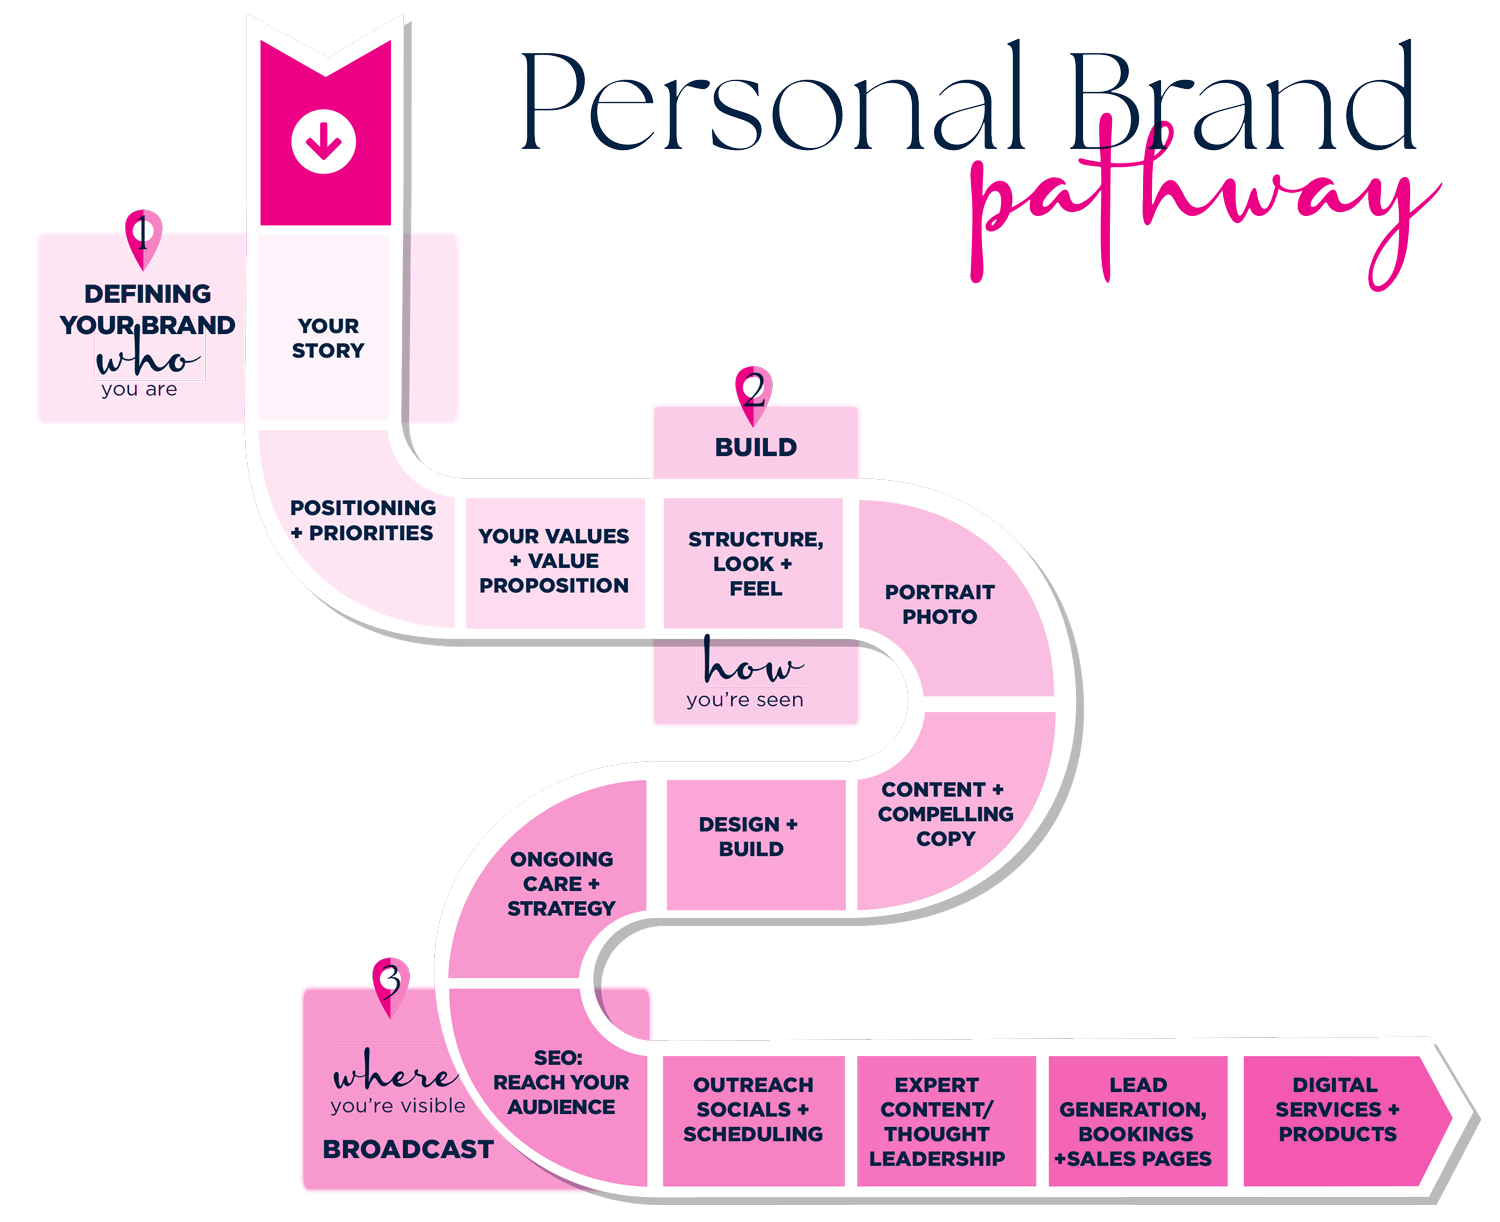 Personal Brand pathway